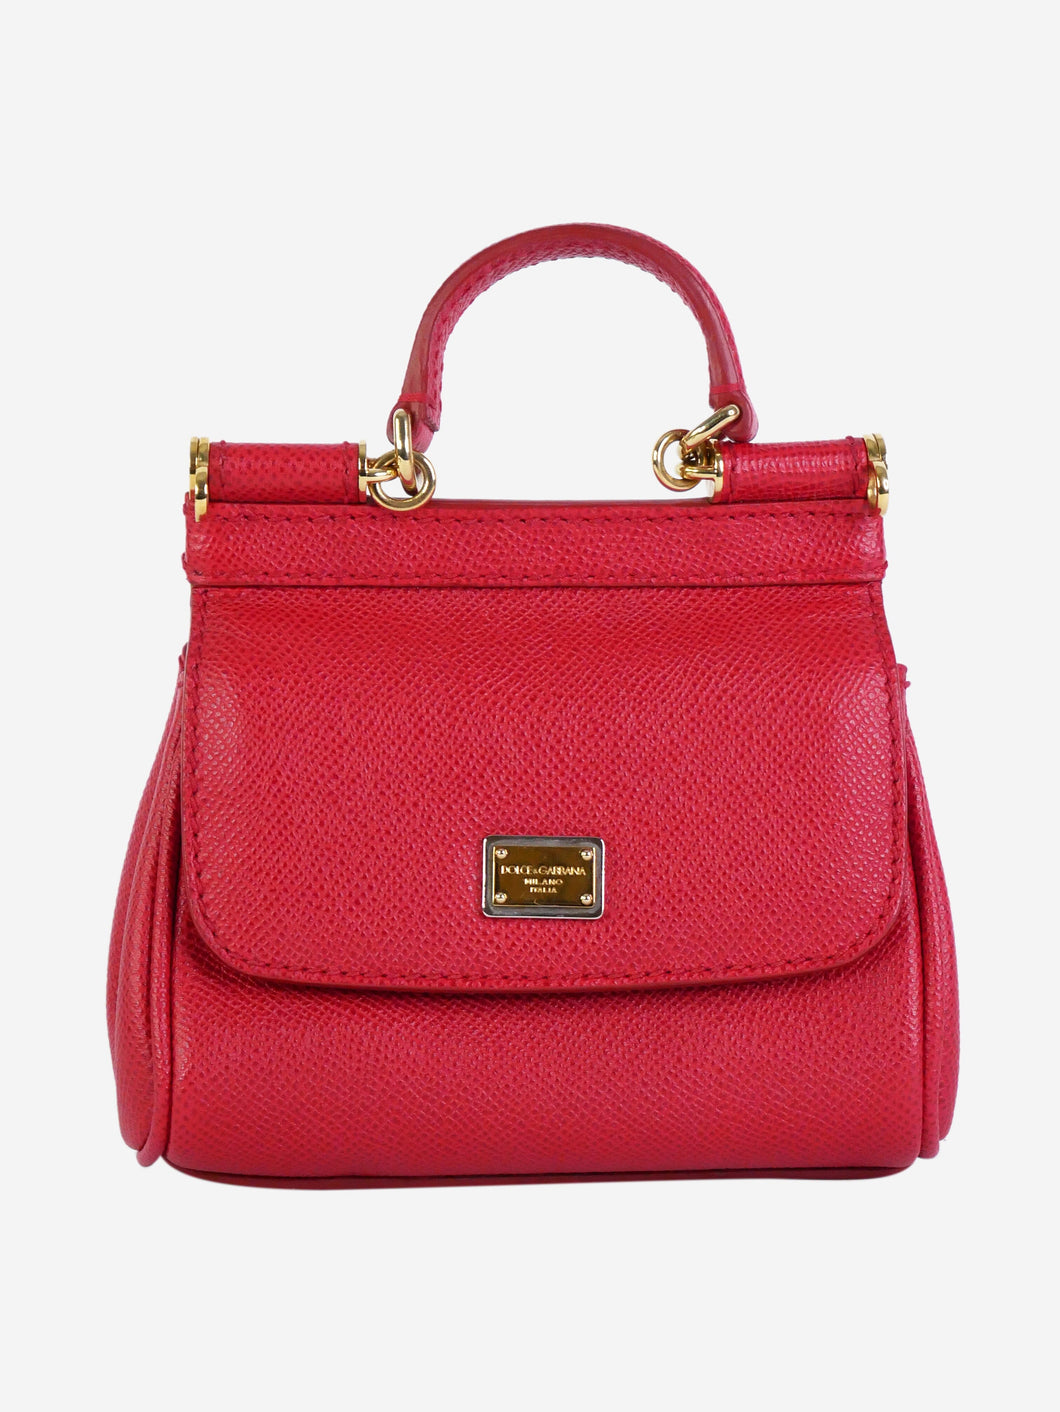 Dolce & Gabbana pre-owned red mini Sicily bag with strap and handle - size  | SOTT